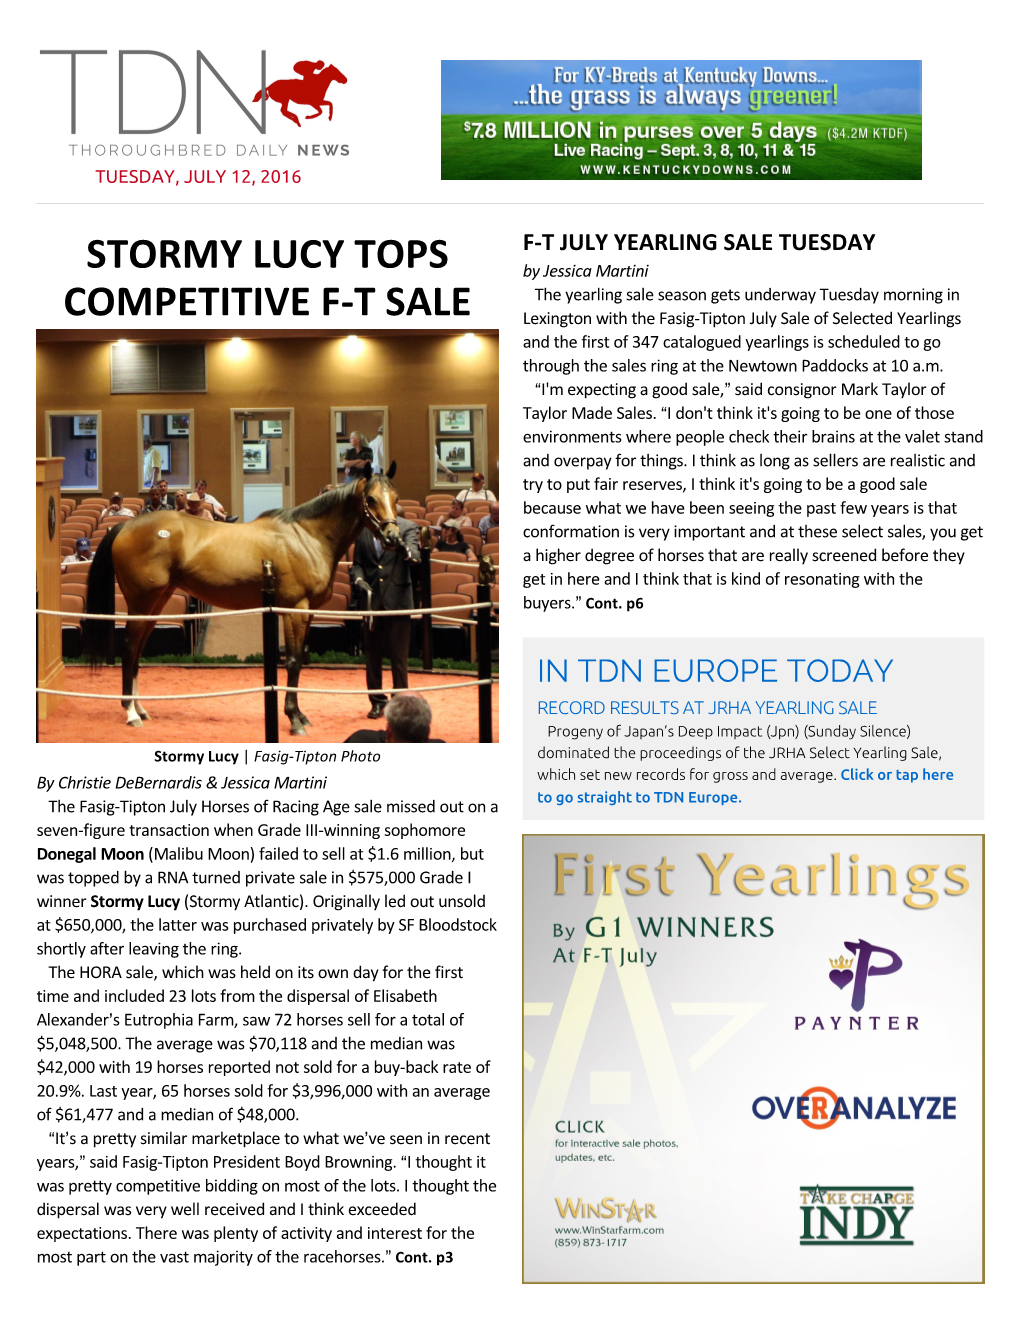 Stormy Lucy Tops Competitive F-T Sale